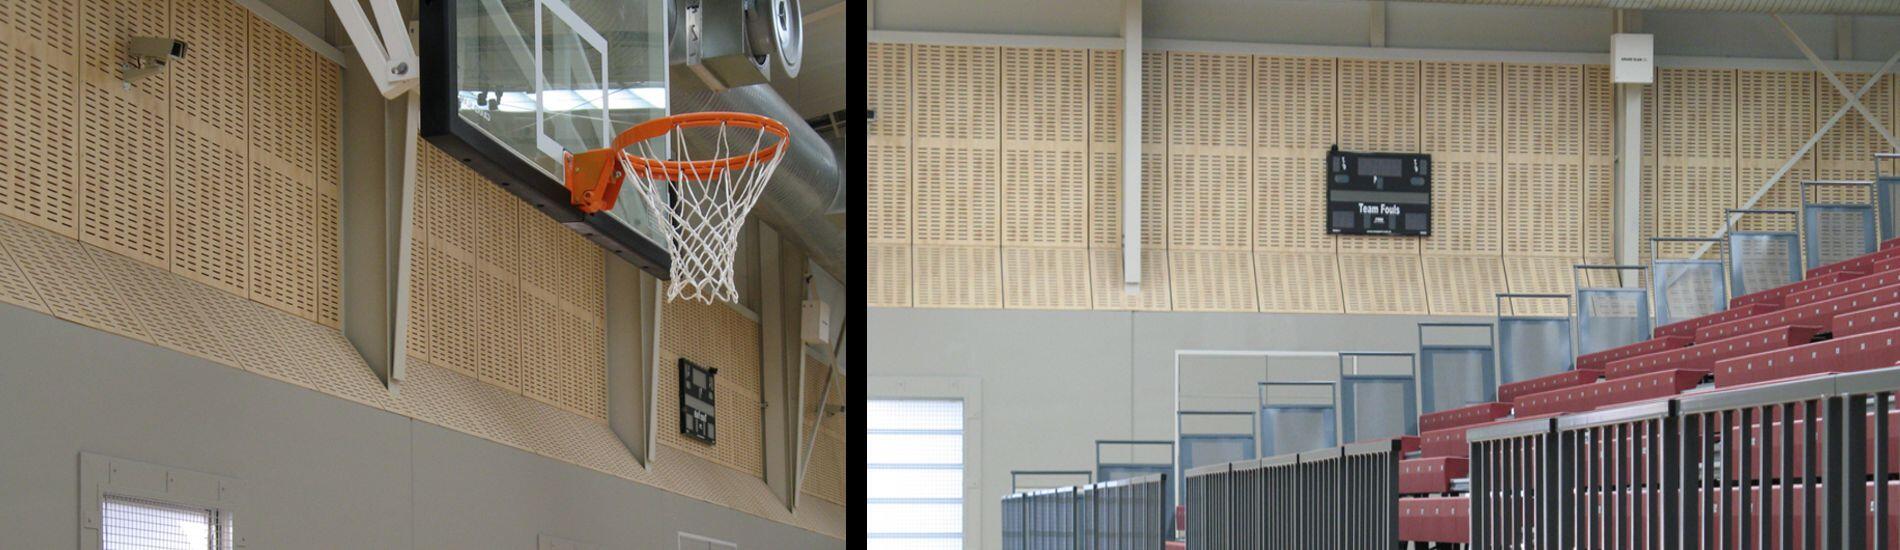 Custom SUPACOUSTIC acoustic panels address noise reverberation in sports hall